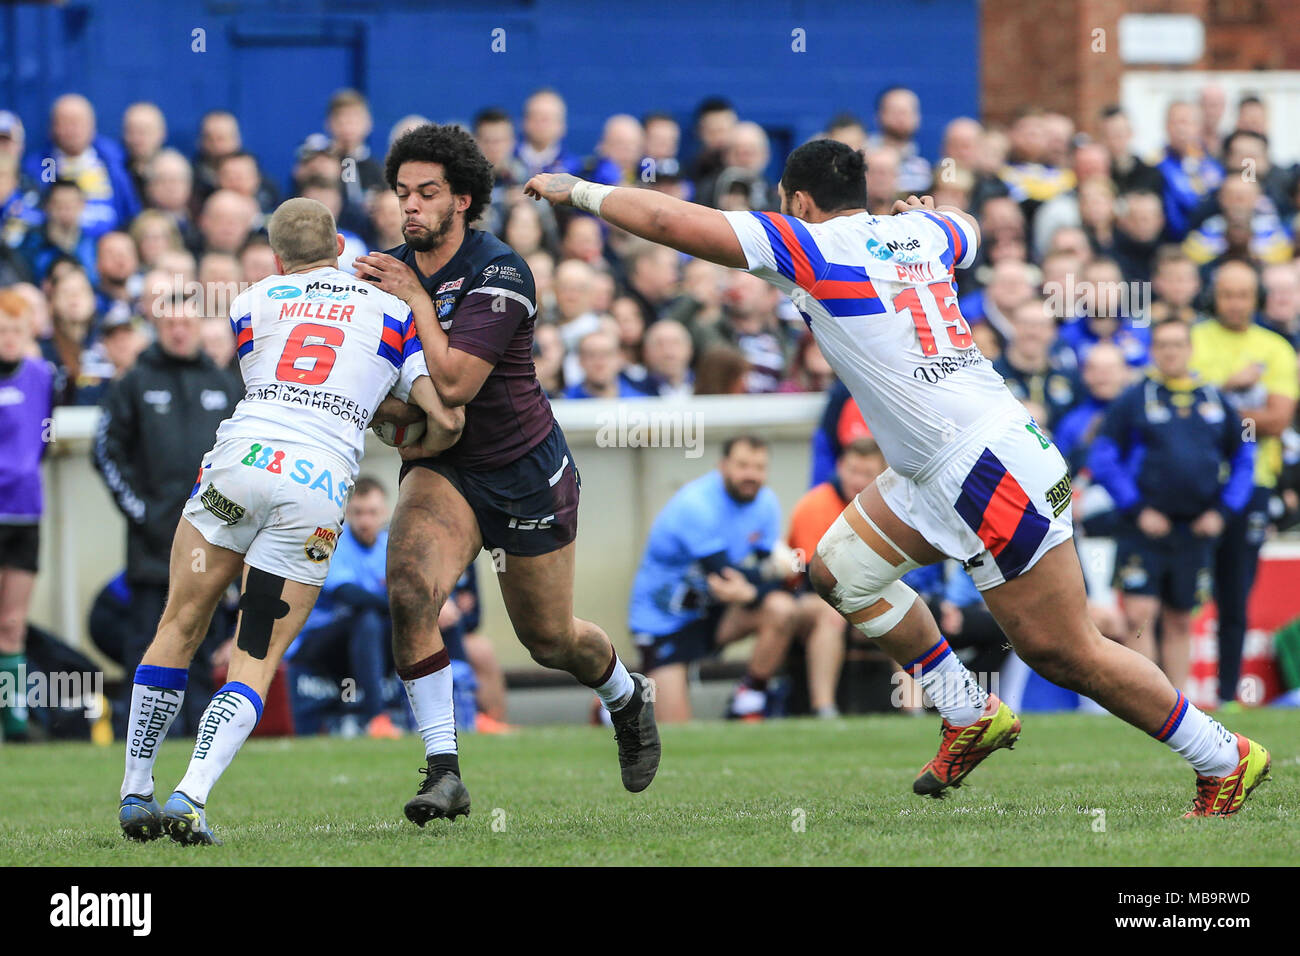 Wakefield, UK. 8th April 2018, Beaumont Legal Stadium, Wakefield, England; Betfred Super League rugby, Wakefield Trinity v Leeds Rhinos; Josh Walters of Leeds Rhinos is tackled by Jacob Miller of Wakefield Trinity Credit: News Images/Alamy Live News Stock Photo